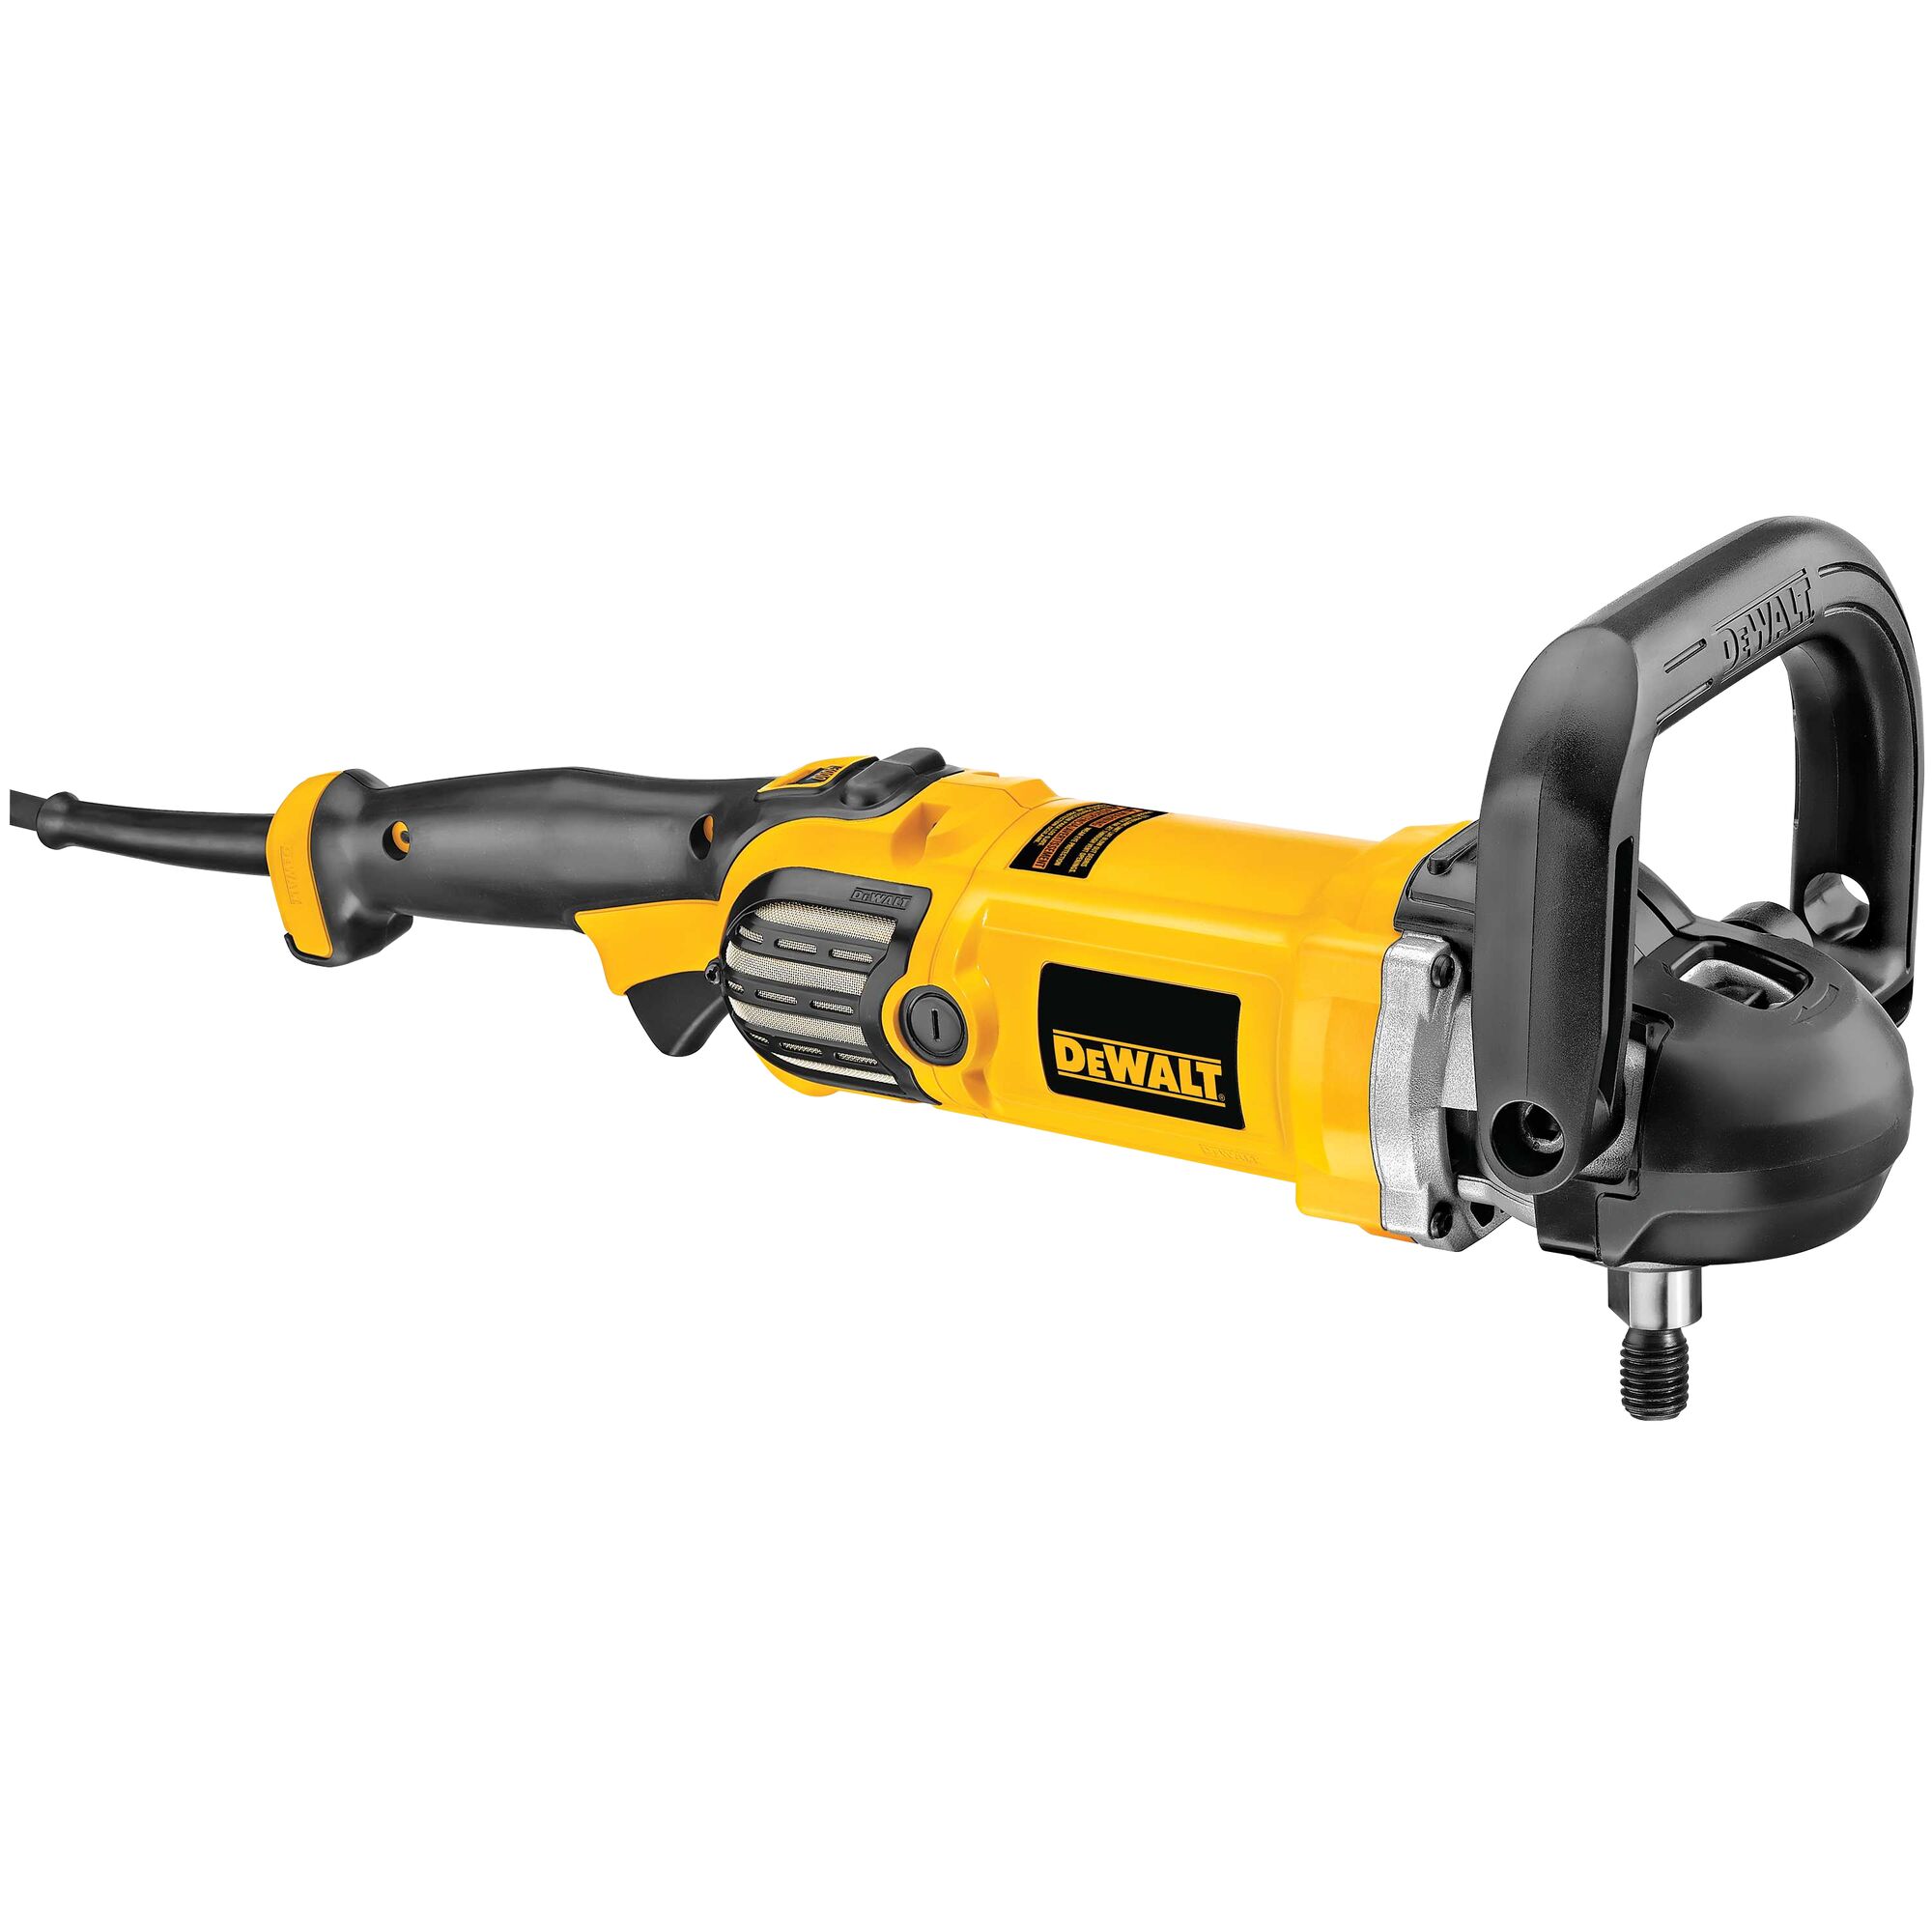 7-Inch DEWALT DWP849X 7-Inch/9-Inch Variable Speed Polisher with Soft Start w/ DW4985CL Wool Buffing Pad and Backing Pad Kit 